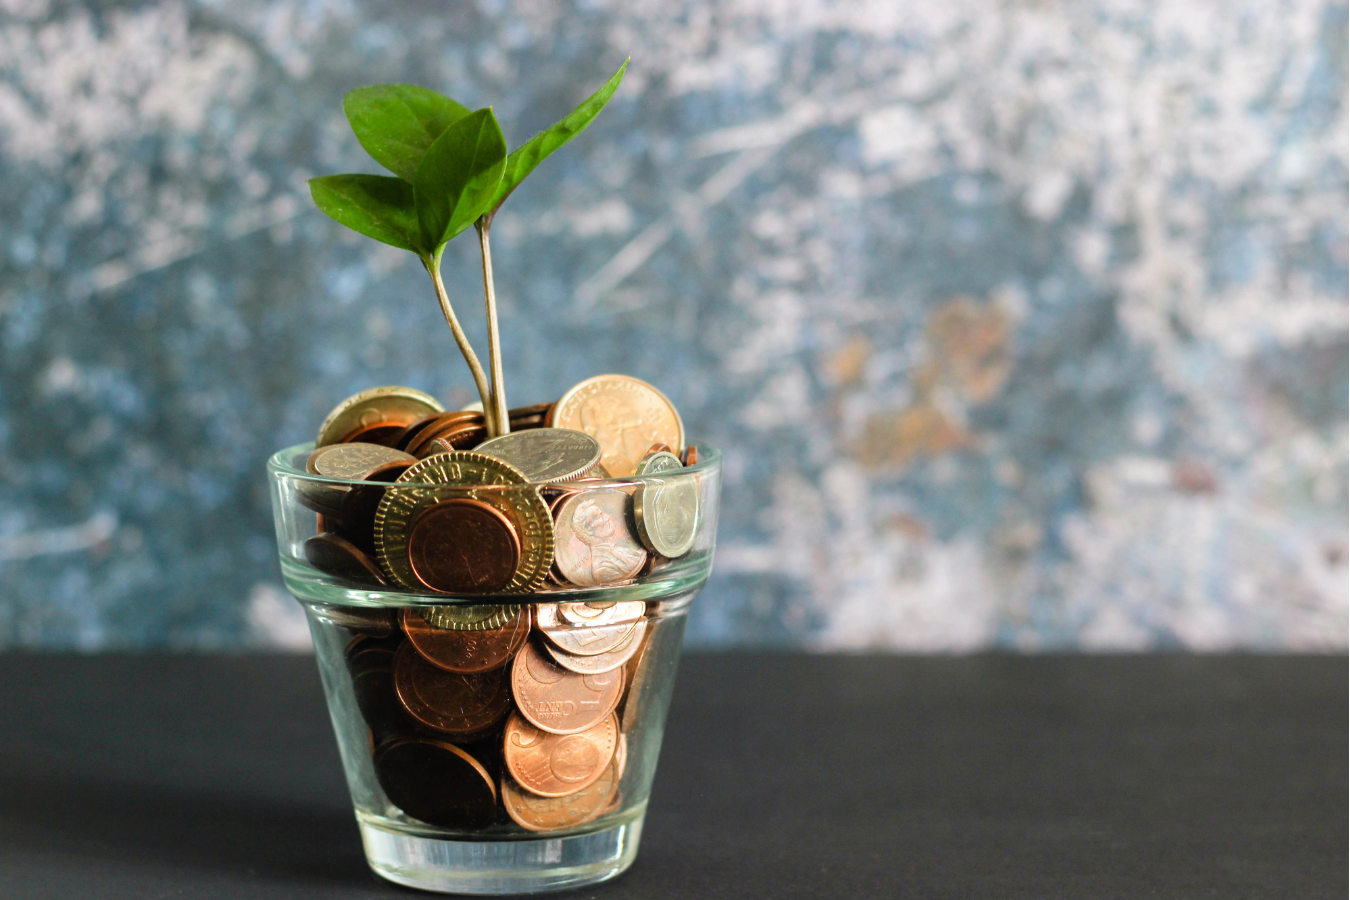 glass vase with coins and plant to represent financial literacy and growth